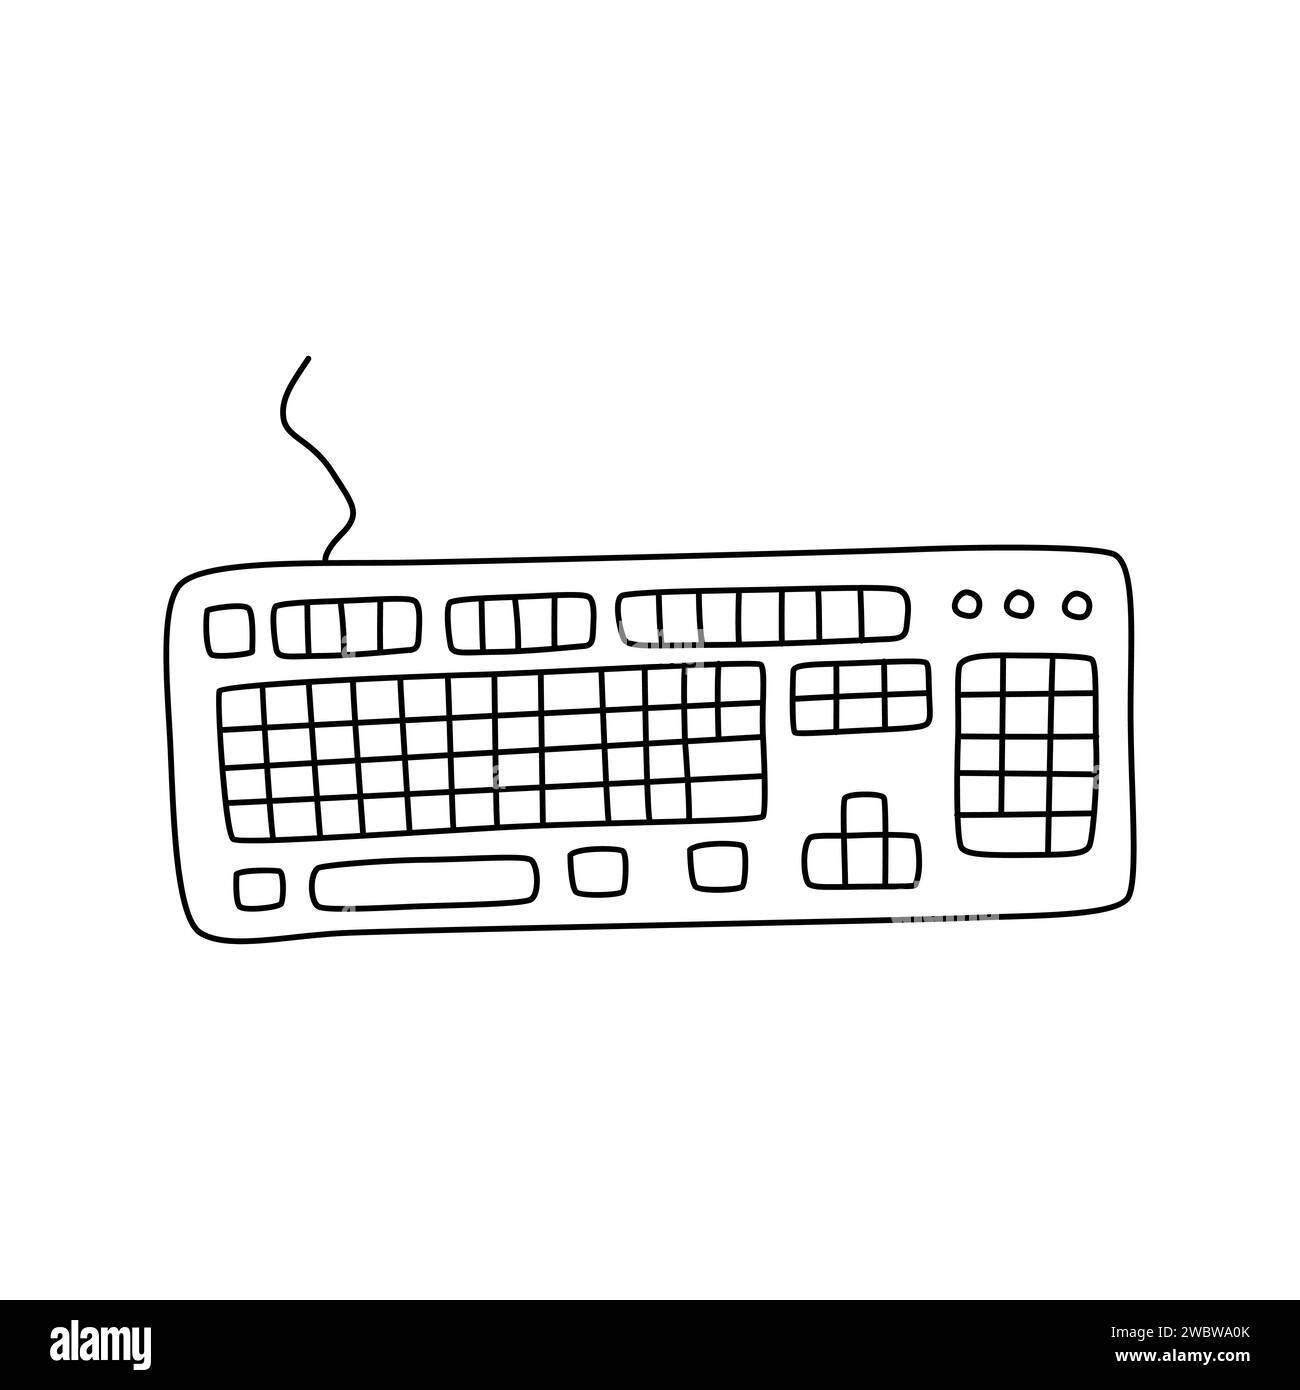 Keyboard in doodle style. Vector illustration isolated on white background Stock Vector